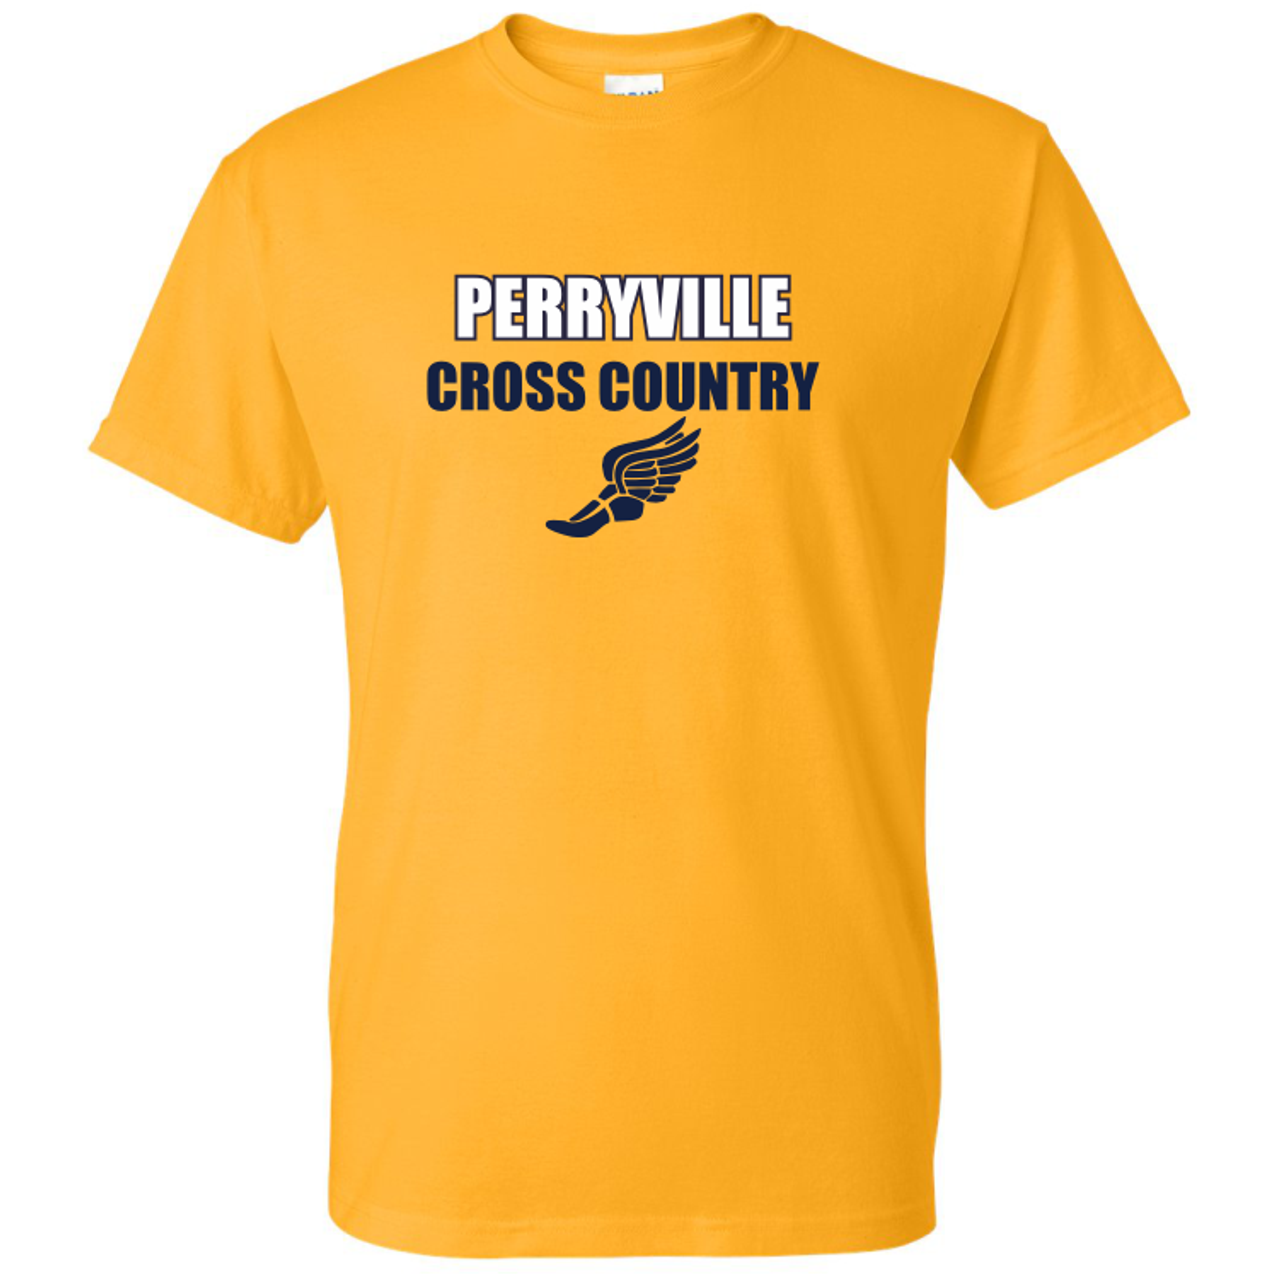 Perryville MS Cross Country Tee, Gold